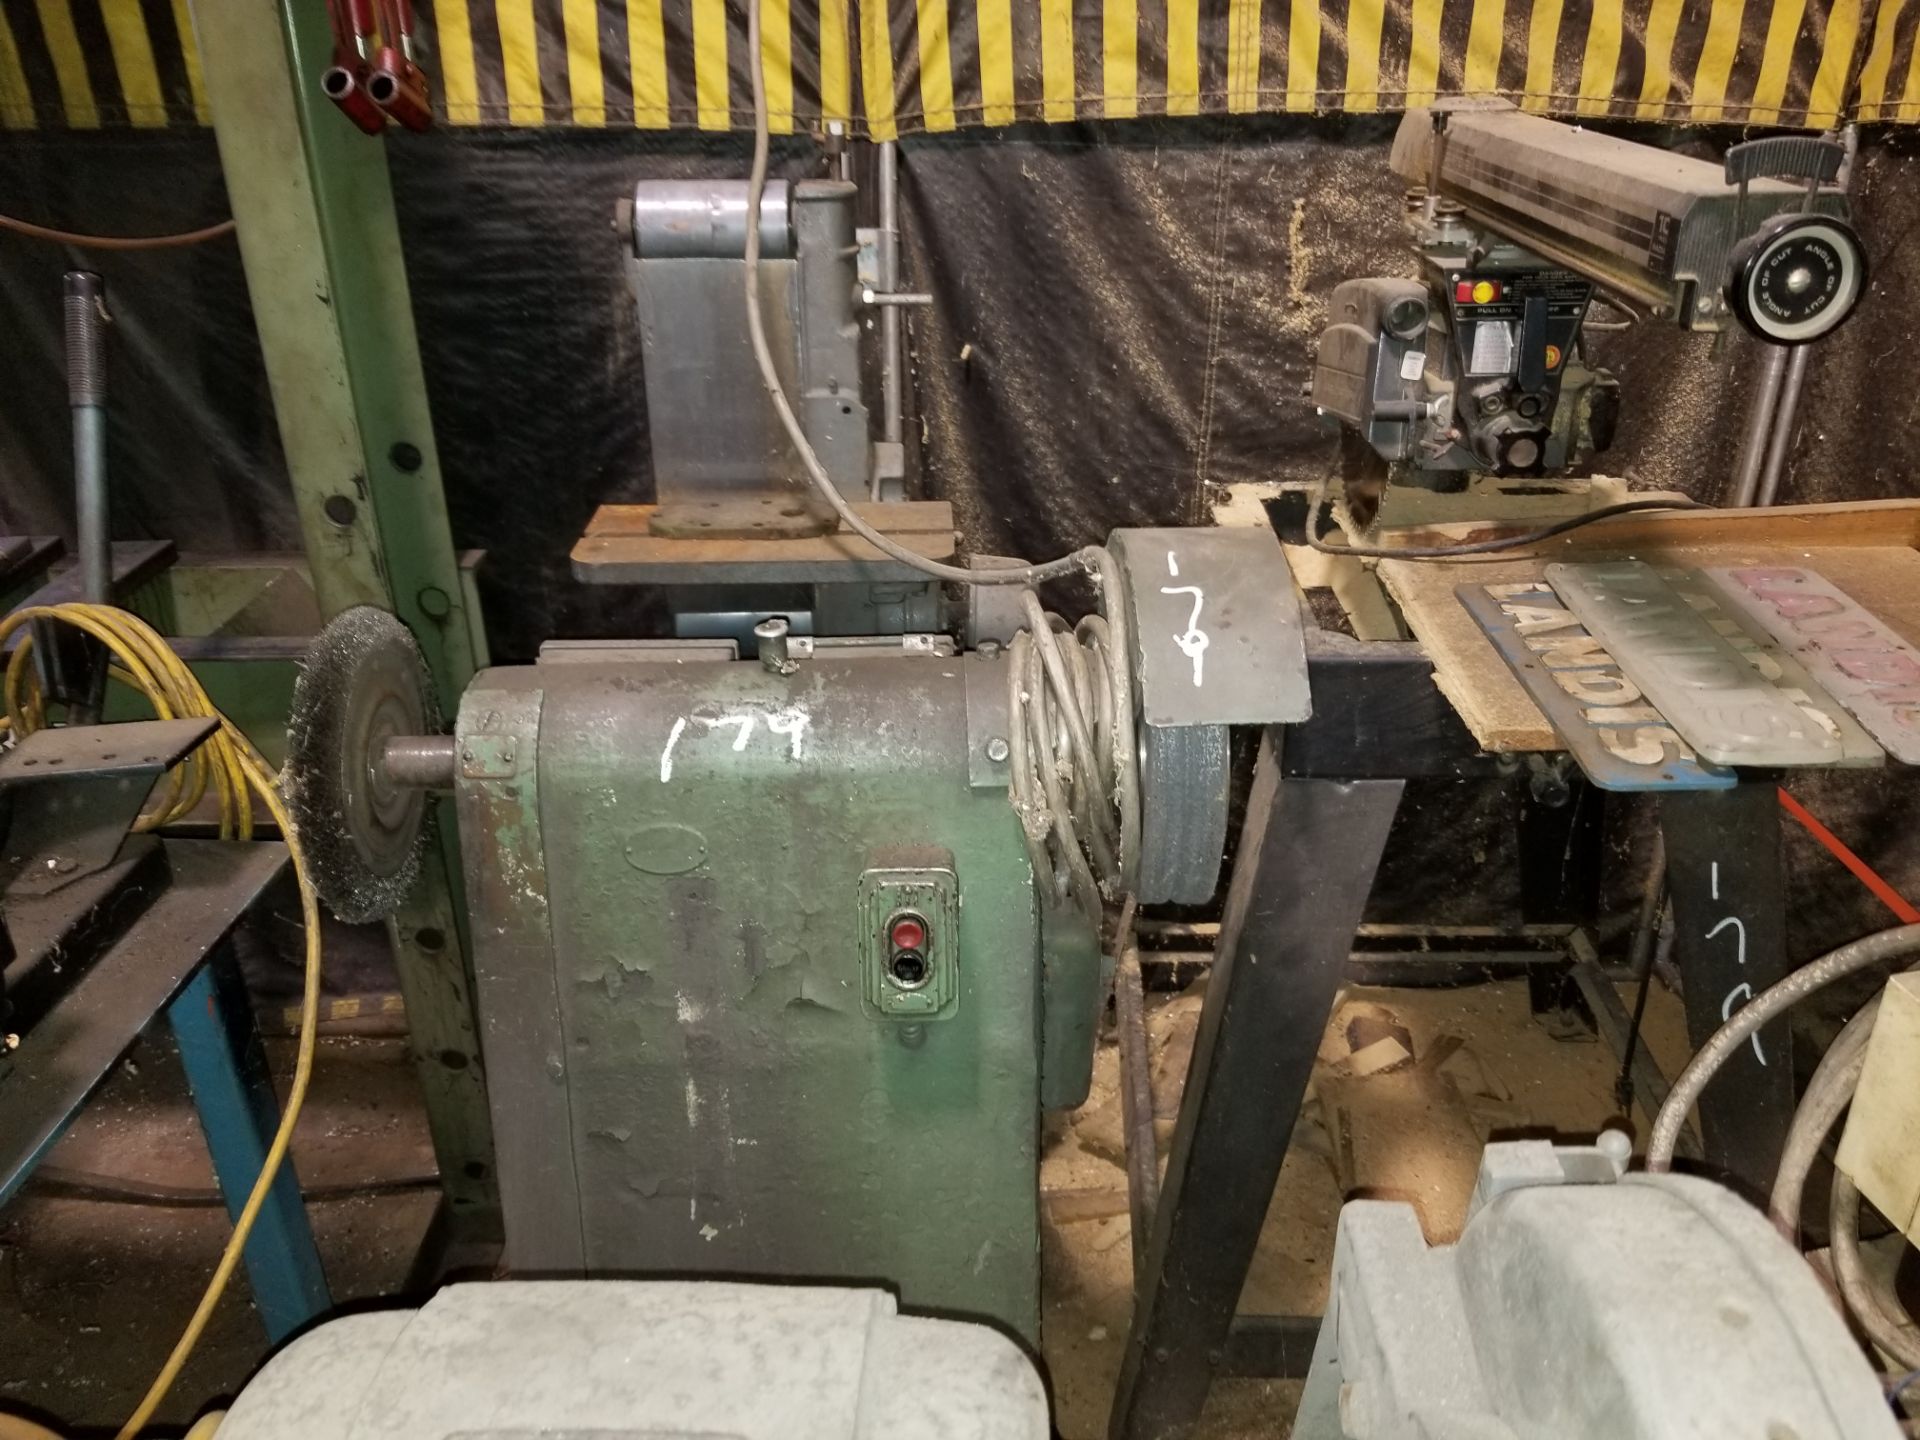 Industrial Press, Grinding Machines, Radial Arm Saw, Hydraulic Tank and More - Image 4 of 4